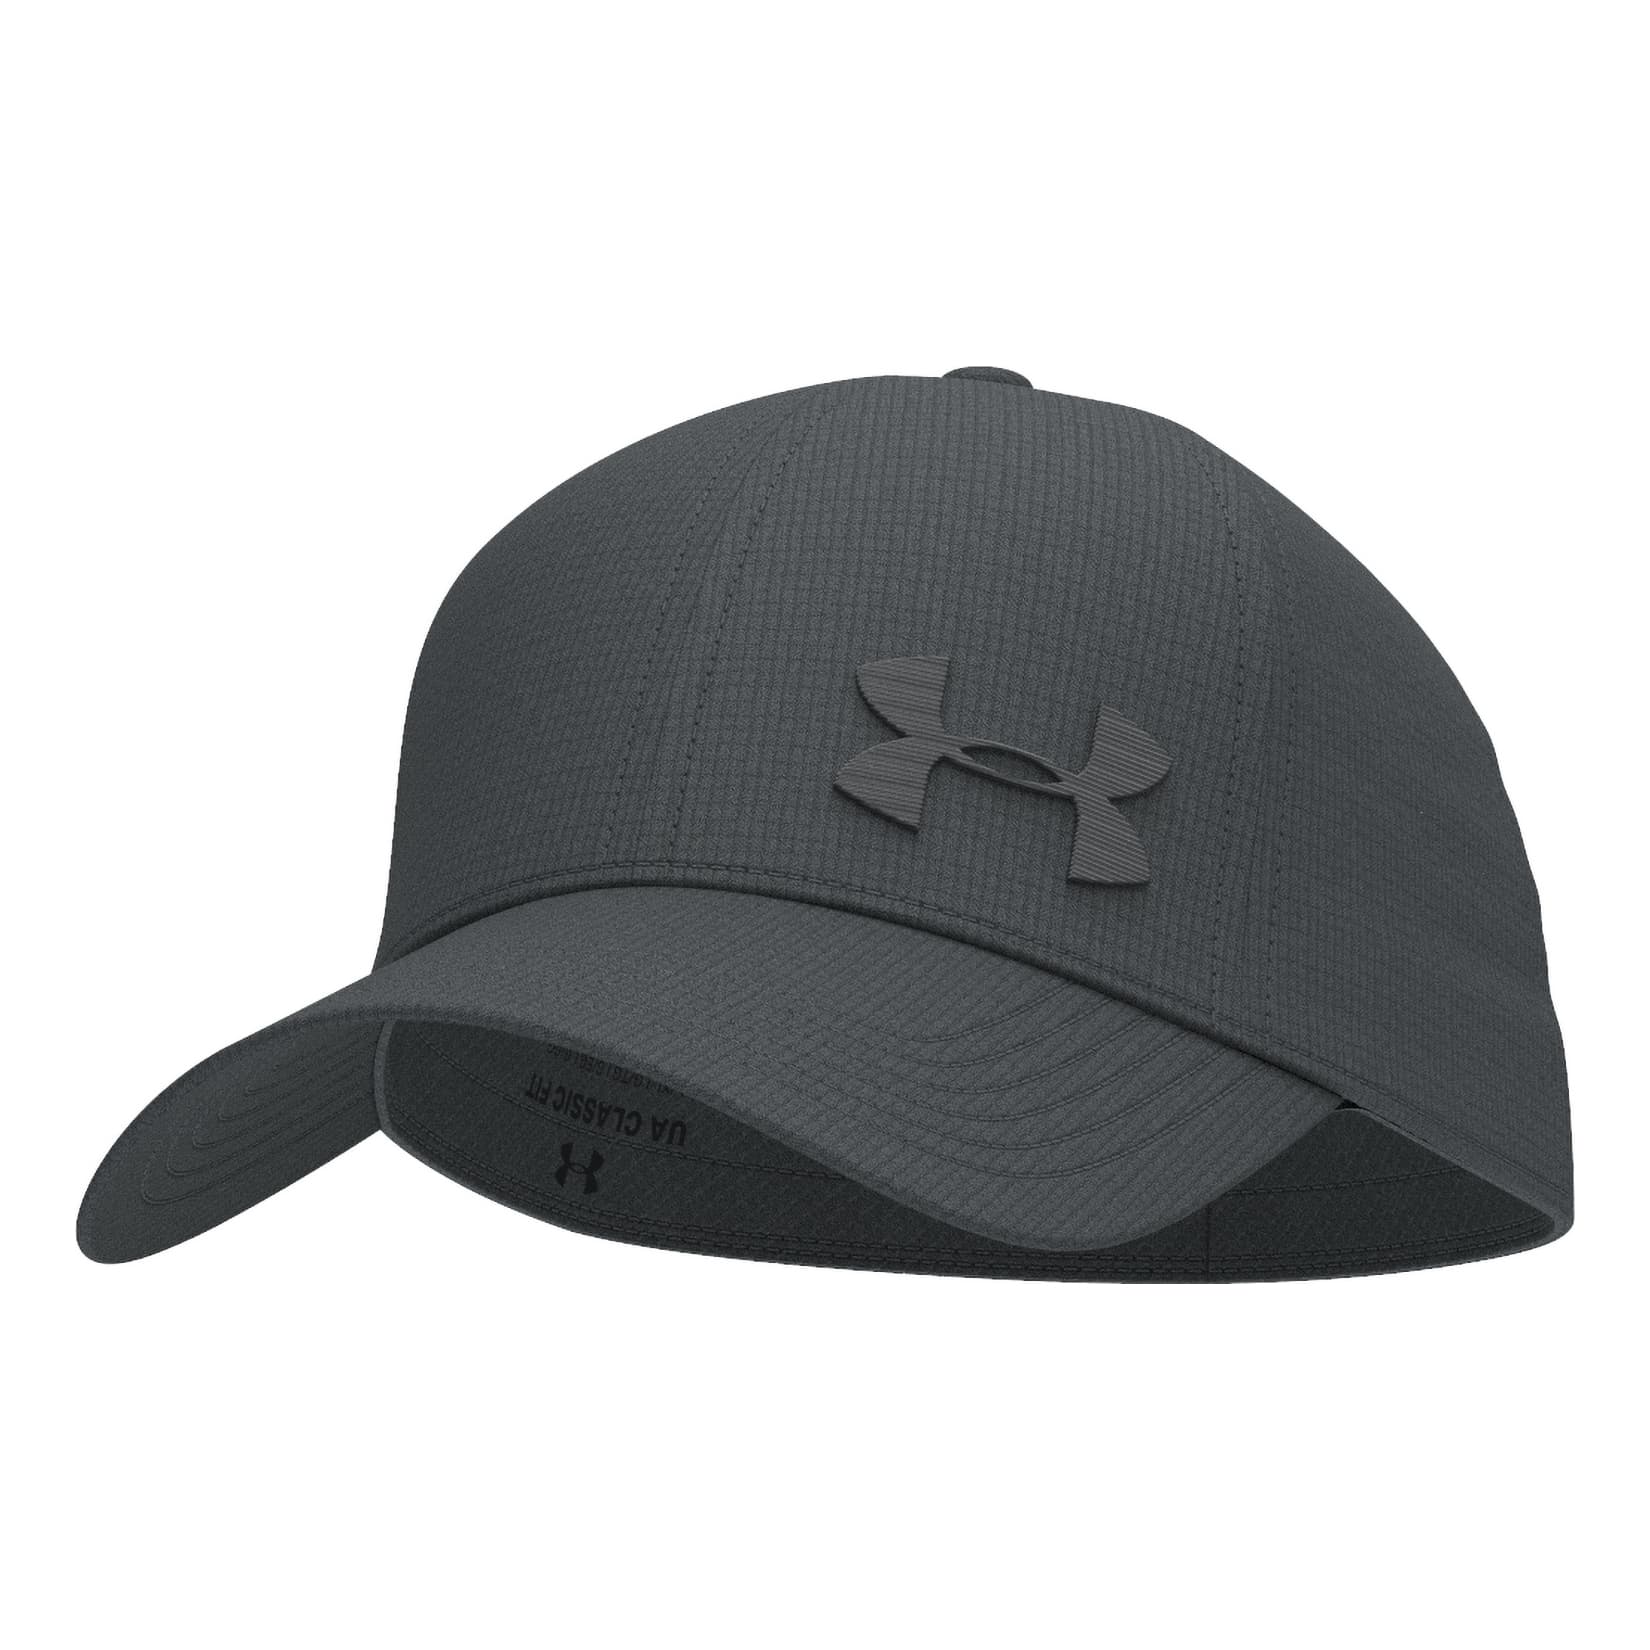 Under Armour® Men’s Iso-Chill ArmourVent™ Stretch Hat - Pitch Grey/Black